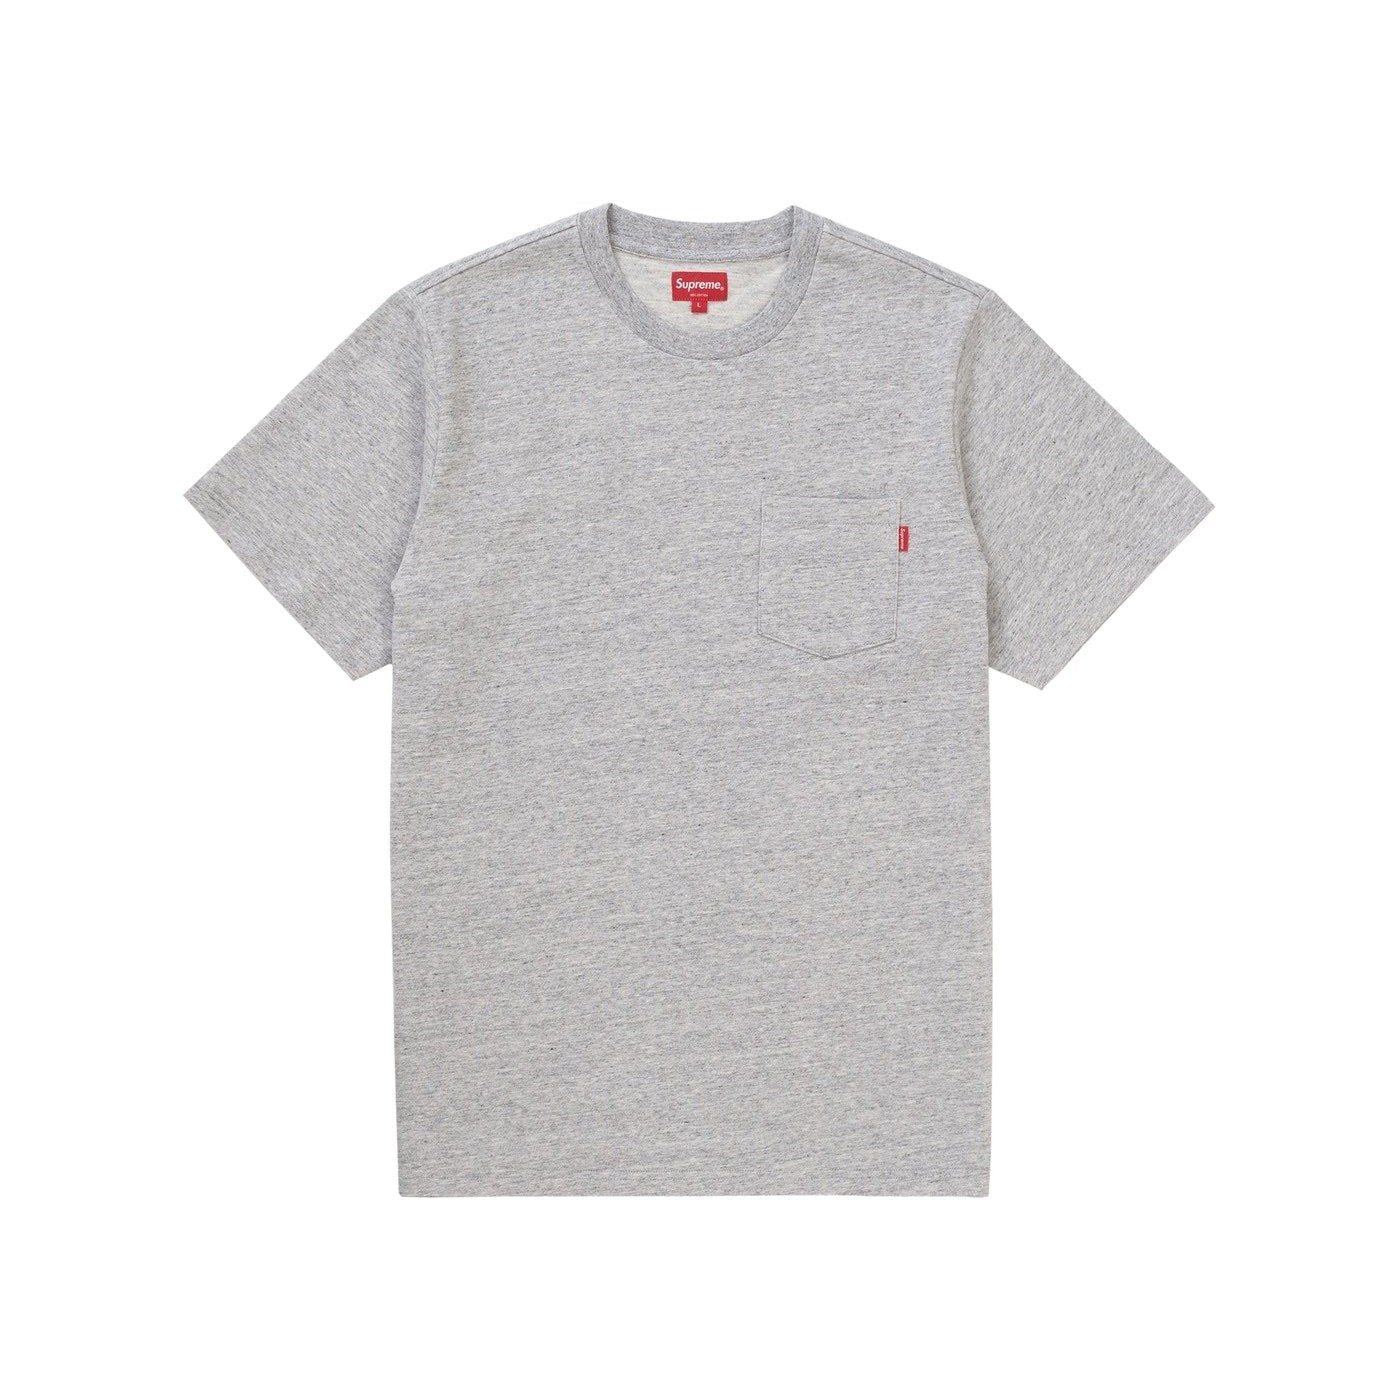 Supreme pocket tee gray - Centrall Online